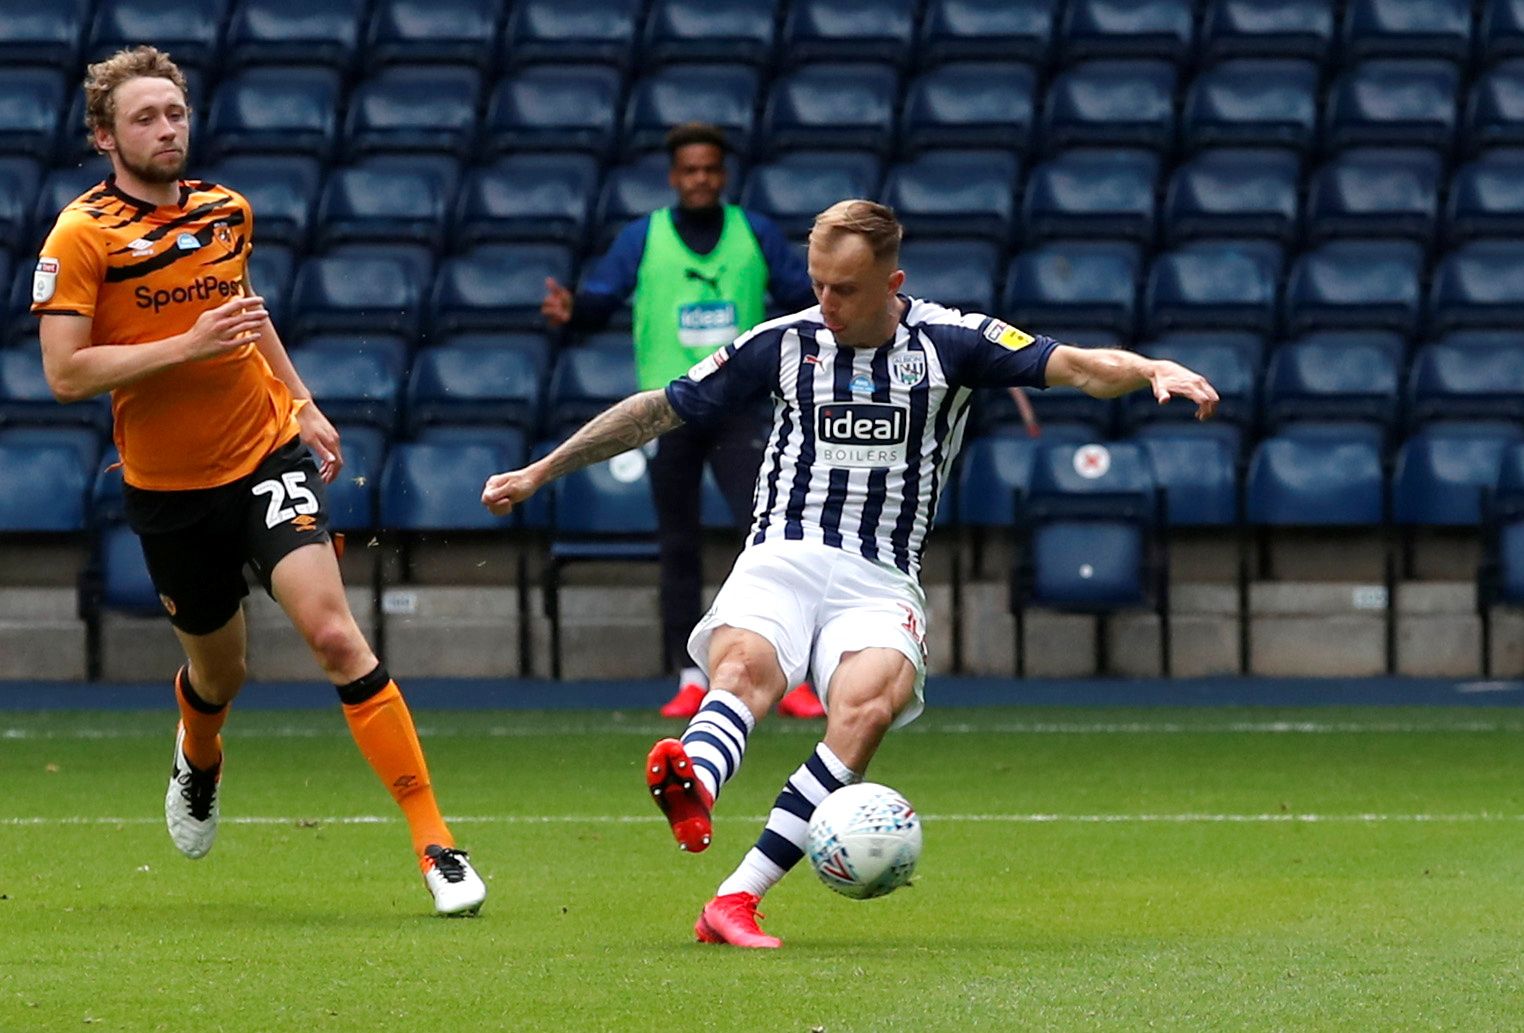 Soccer Football - Championship - West Bromwich Albion v Hull City - The Hawthorns, West Bromwich, Britain - July 5, 2020  West Bromwich Albion's Kamil Grosicki scores their third goal, as play resumes behind closed doors following the outbreak of the coronavirus disease (COVID-19)   Action Images/Andrew Boyers    EDITORIAL USE ONLY. No use with unauthorized audio, video, data, fixture lists, club/league logos or 